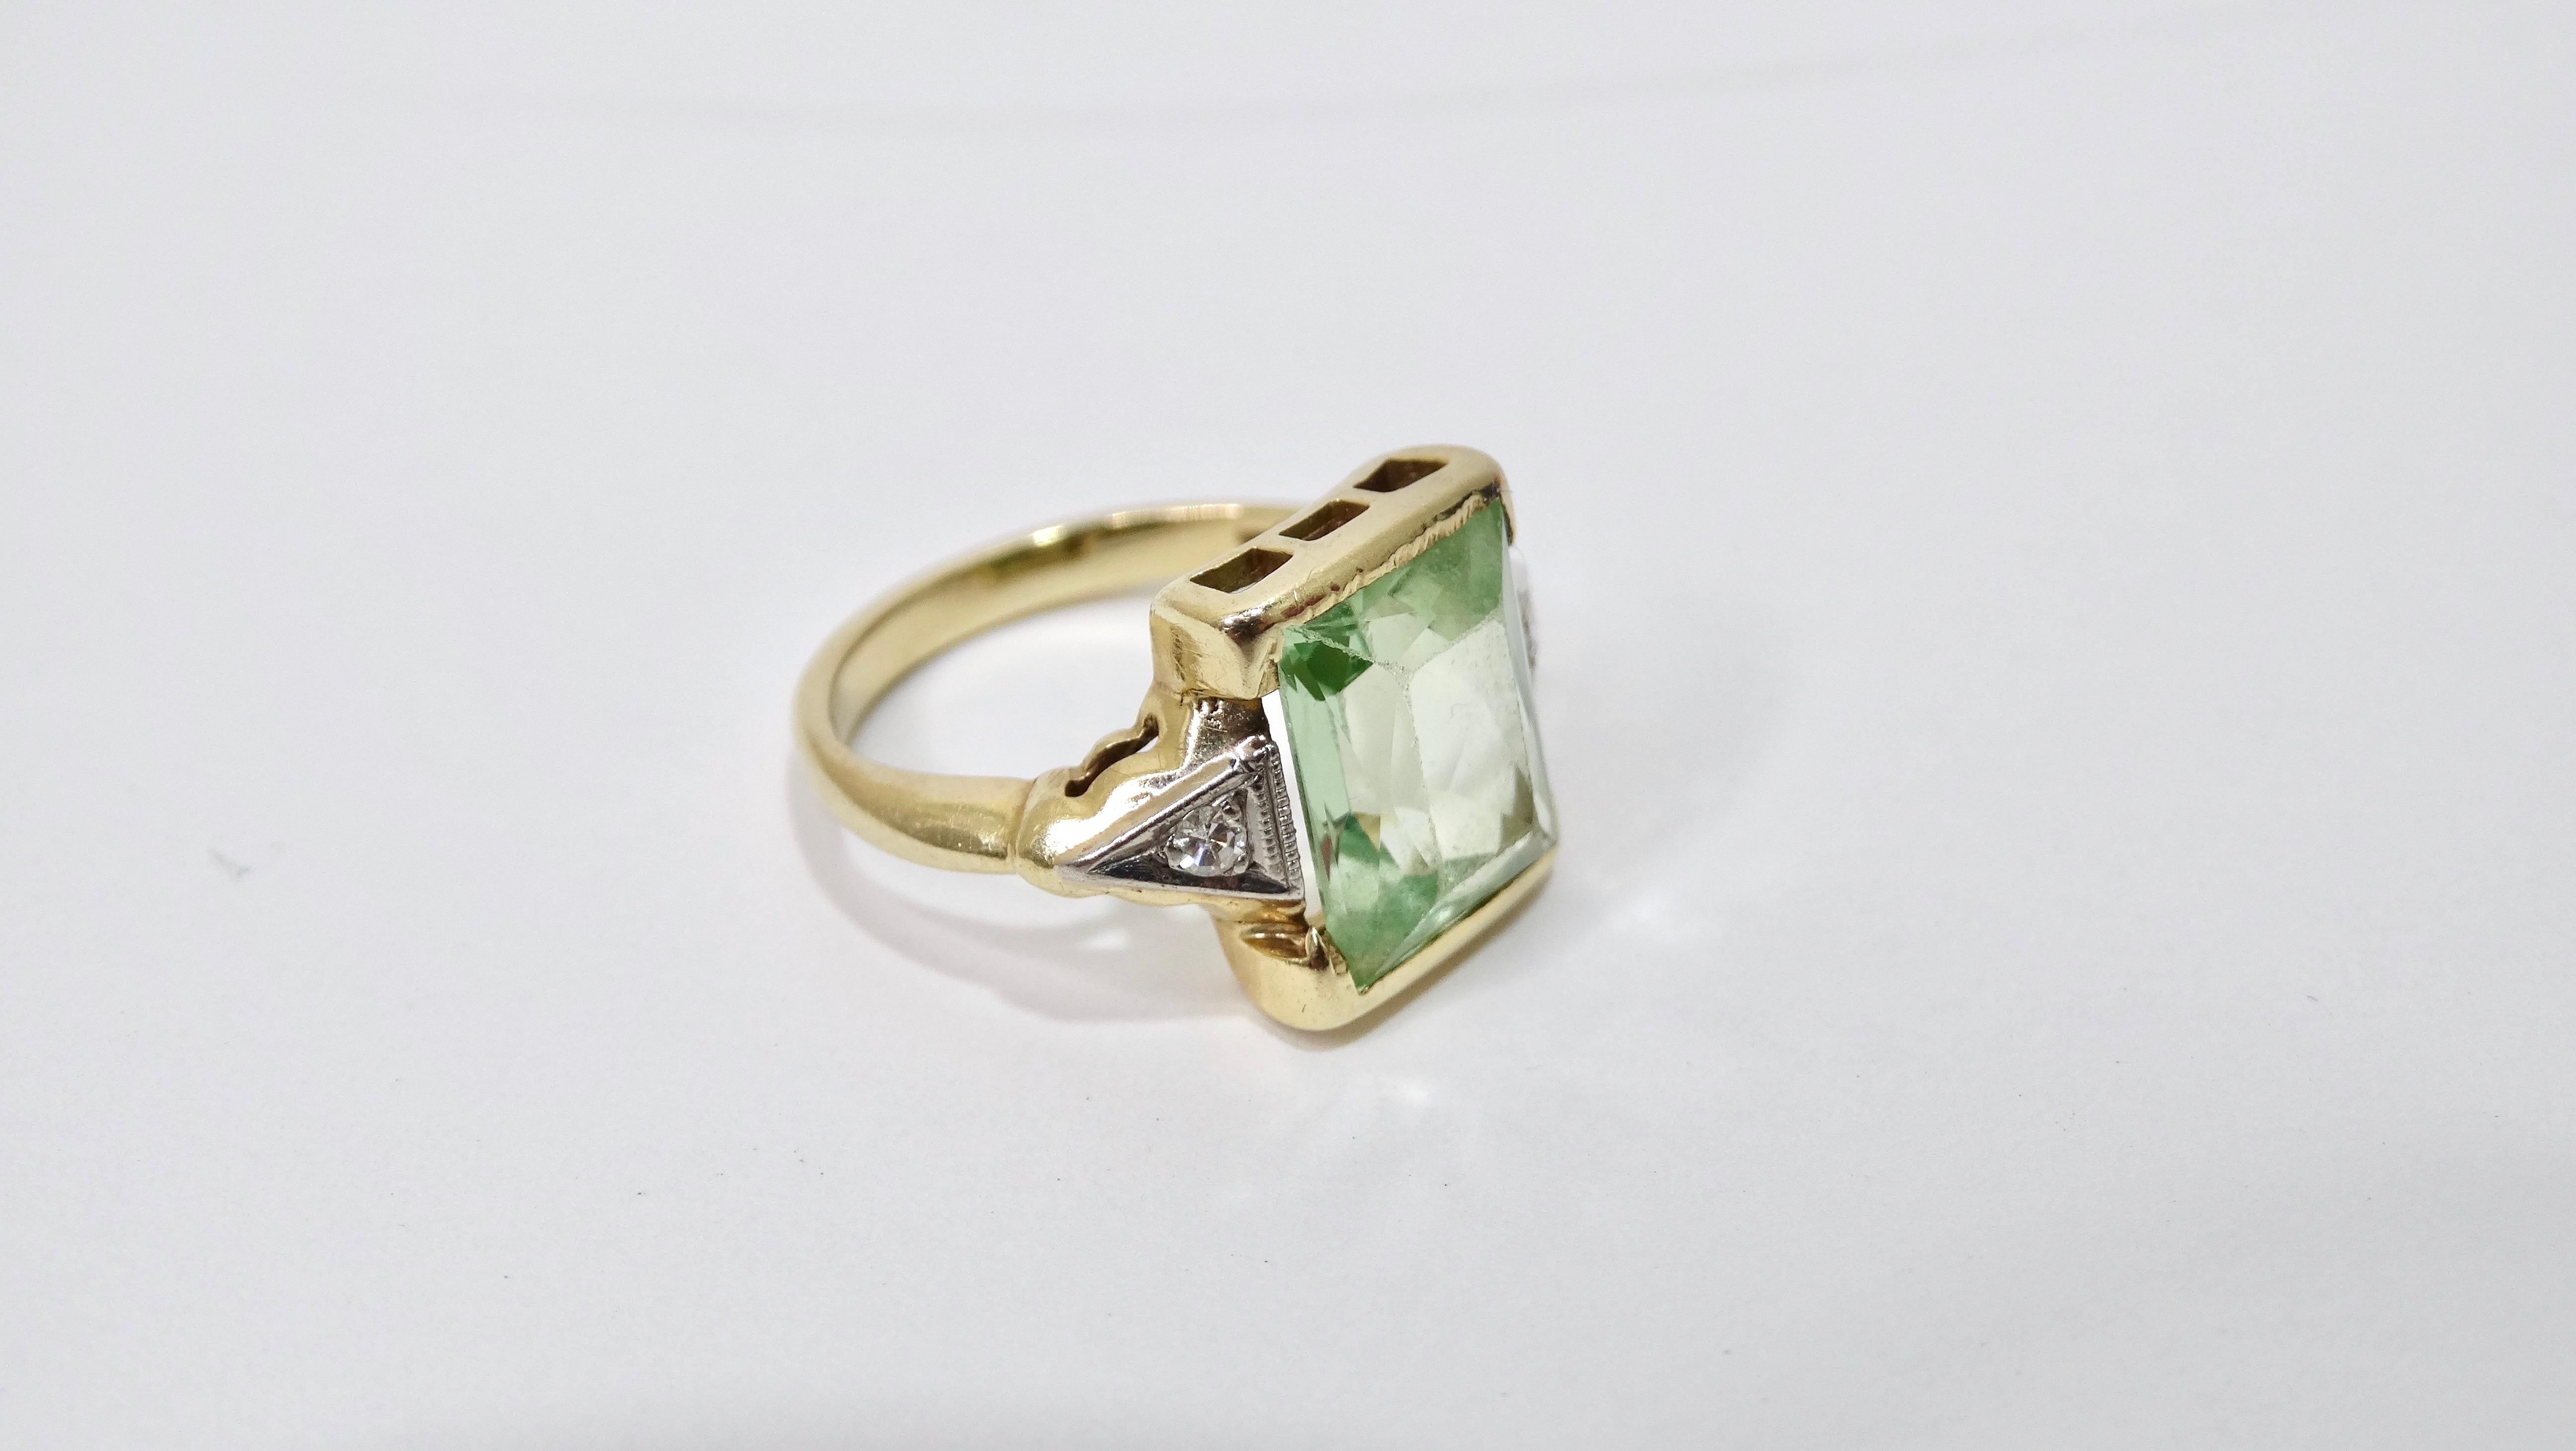 A wondrous and stunning ring that will bring to life your jewelry collection! This ring is made of a vibrant 14k gold complimented by a large tourmaline emerald cut stone in the center accompanied by two diamonds on either side. Don't miss the great